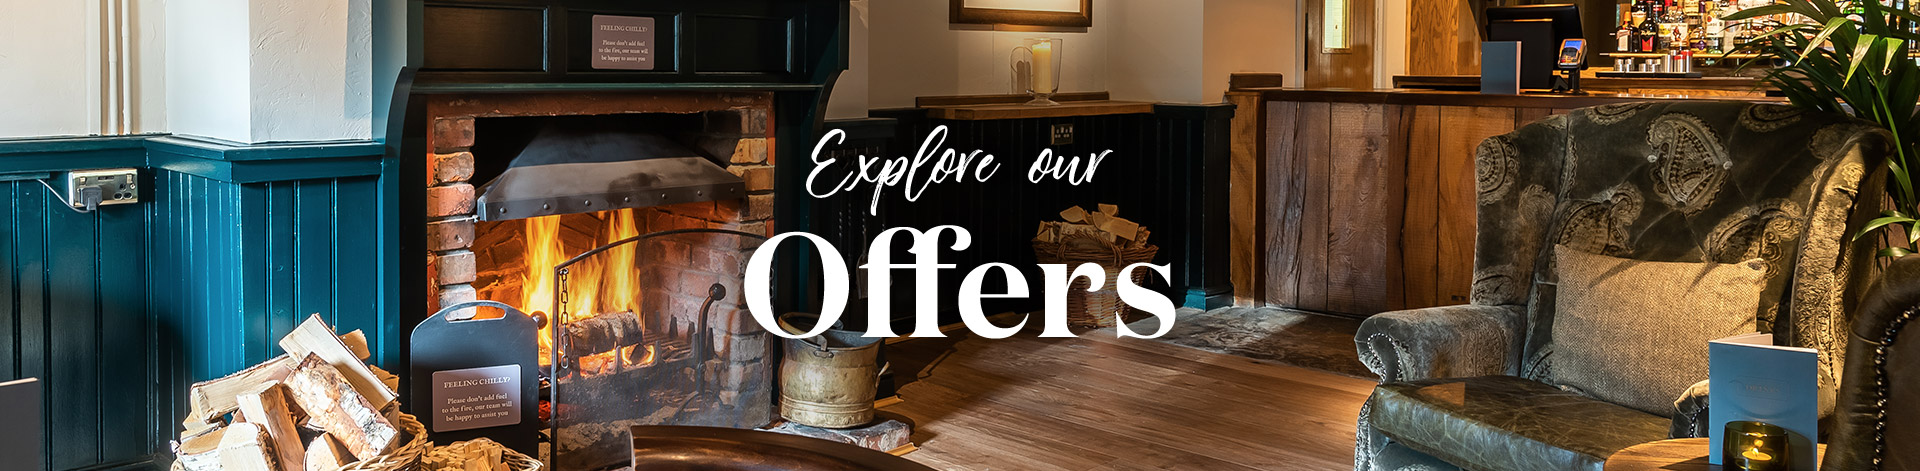 Our latest offers at The Red Lion, Alvechurch